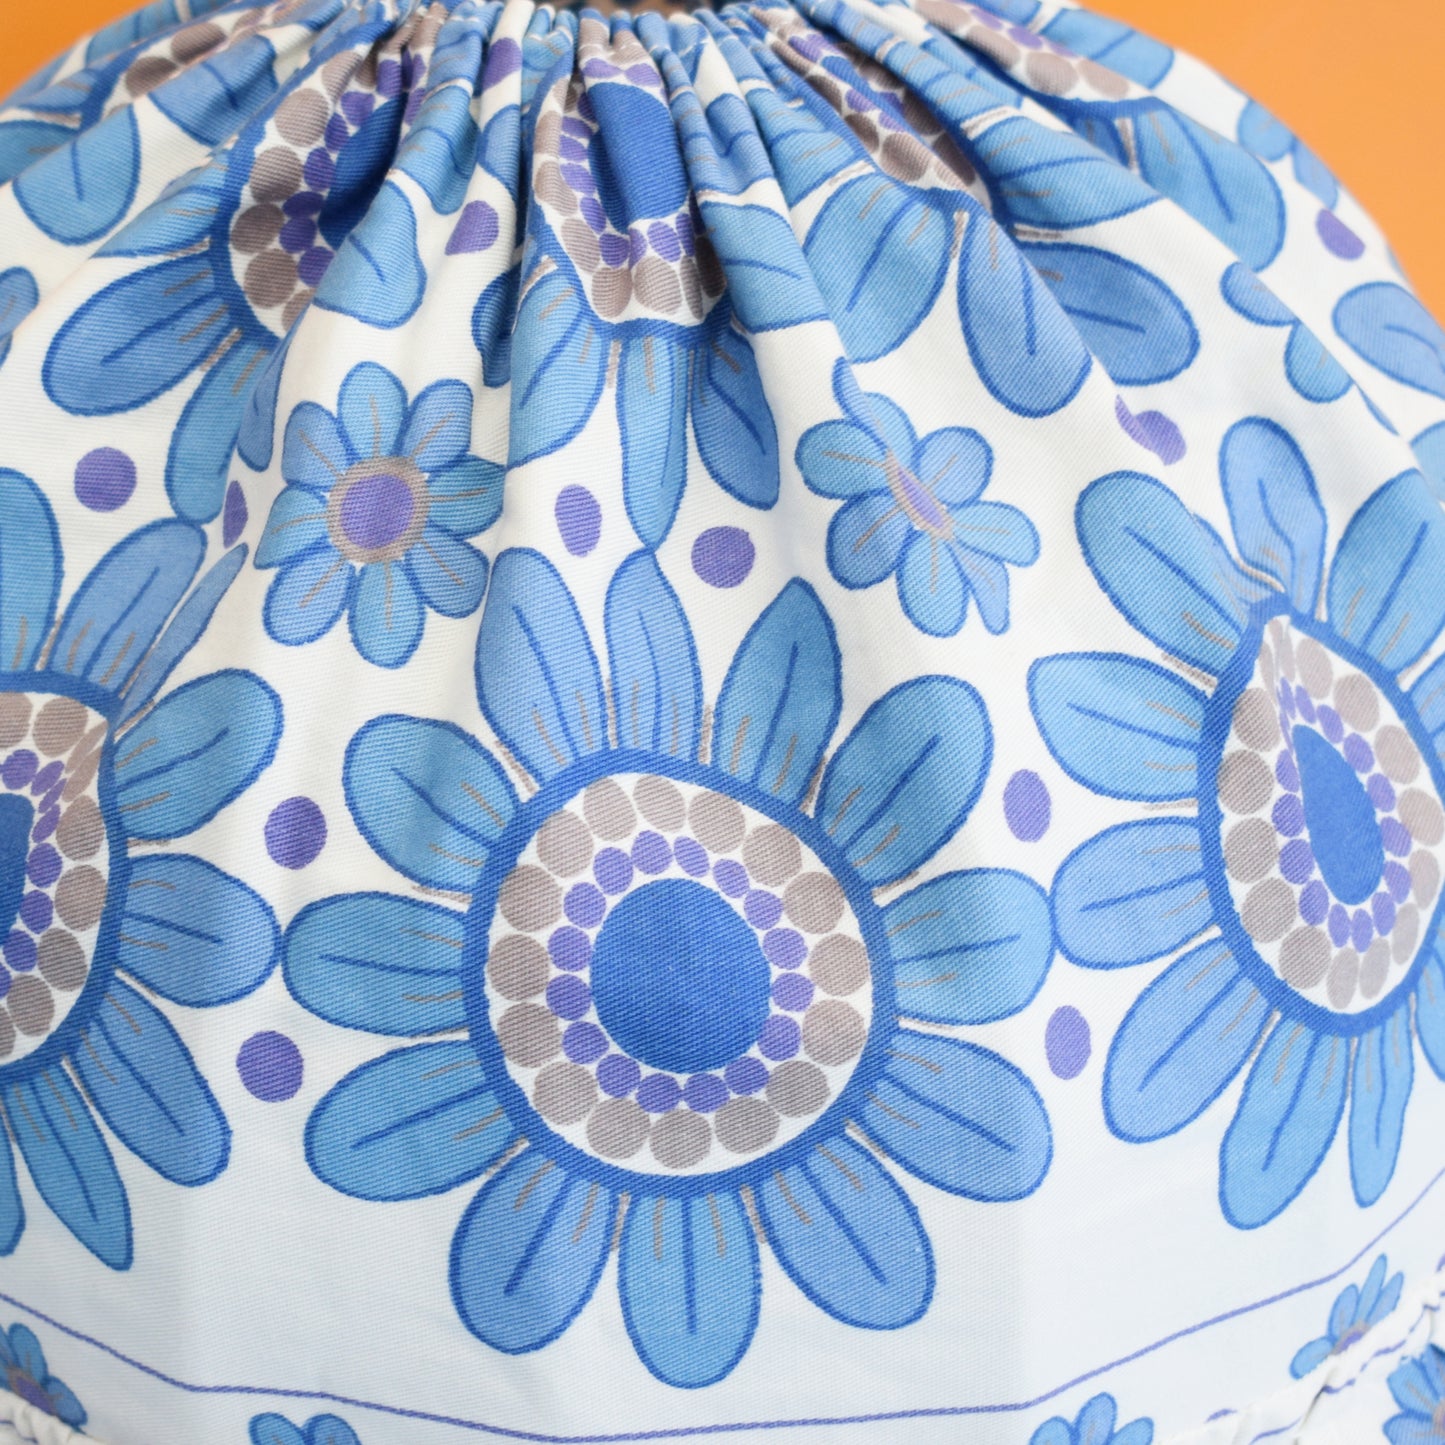 Vintage 1970s Fabric Lampshade - Flower Power - Blue